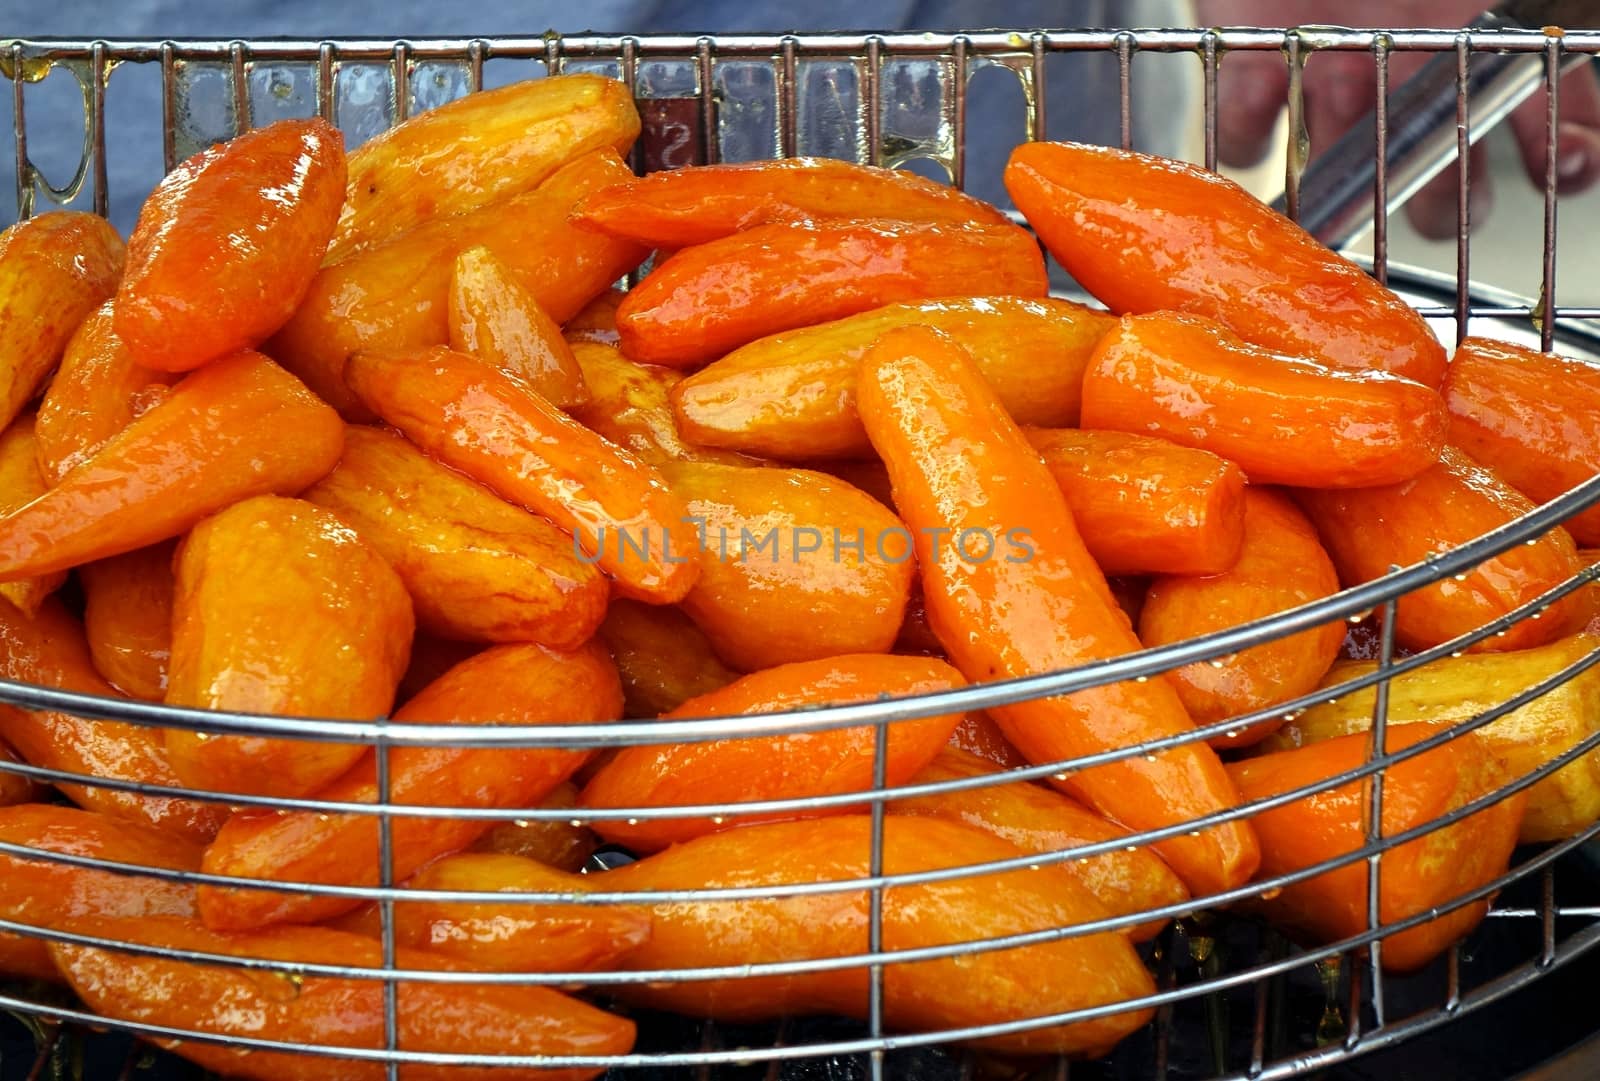 Baked sweet potatoes glazed with sugar are a popular Chinese snack